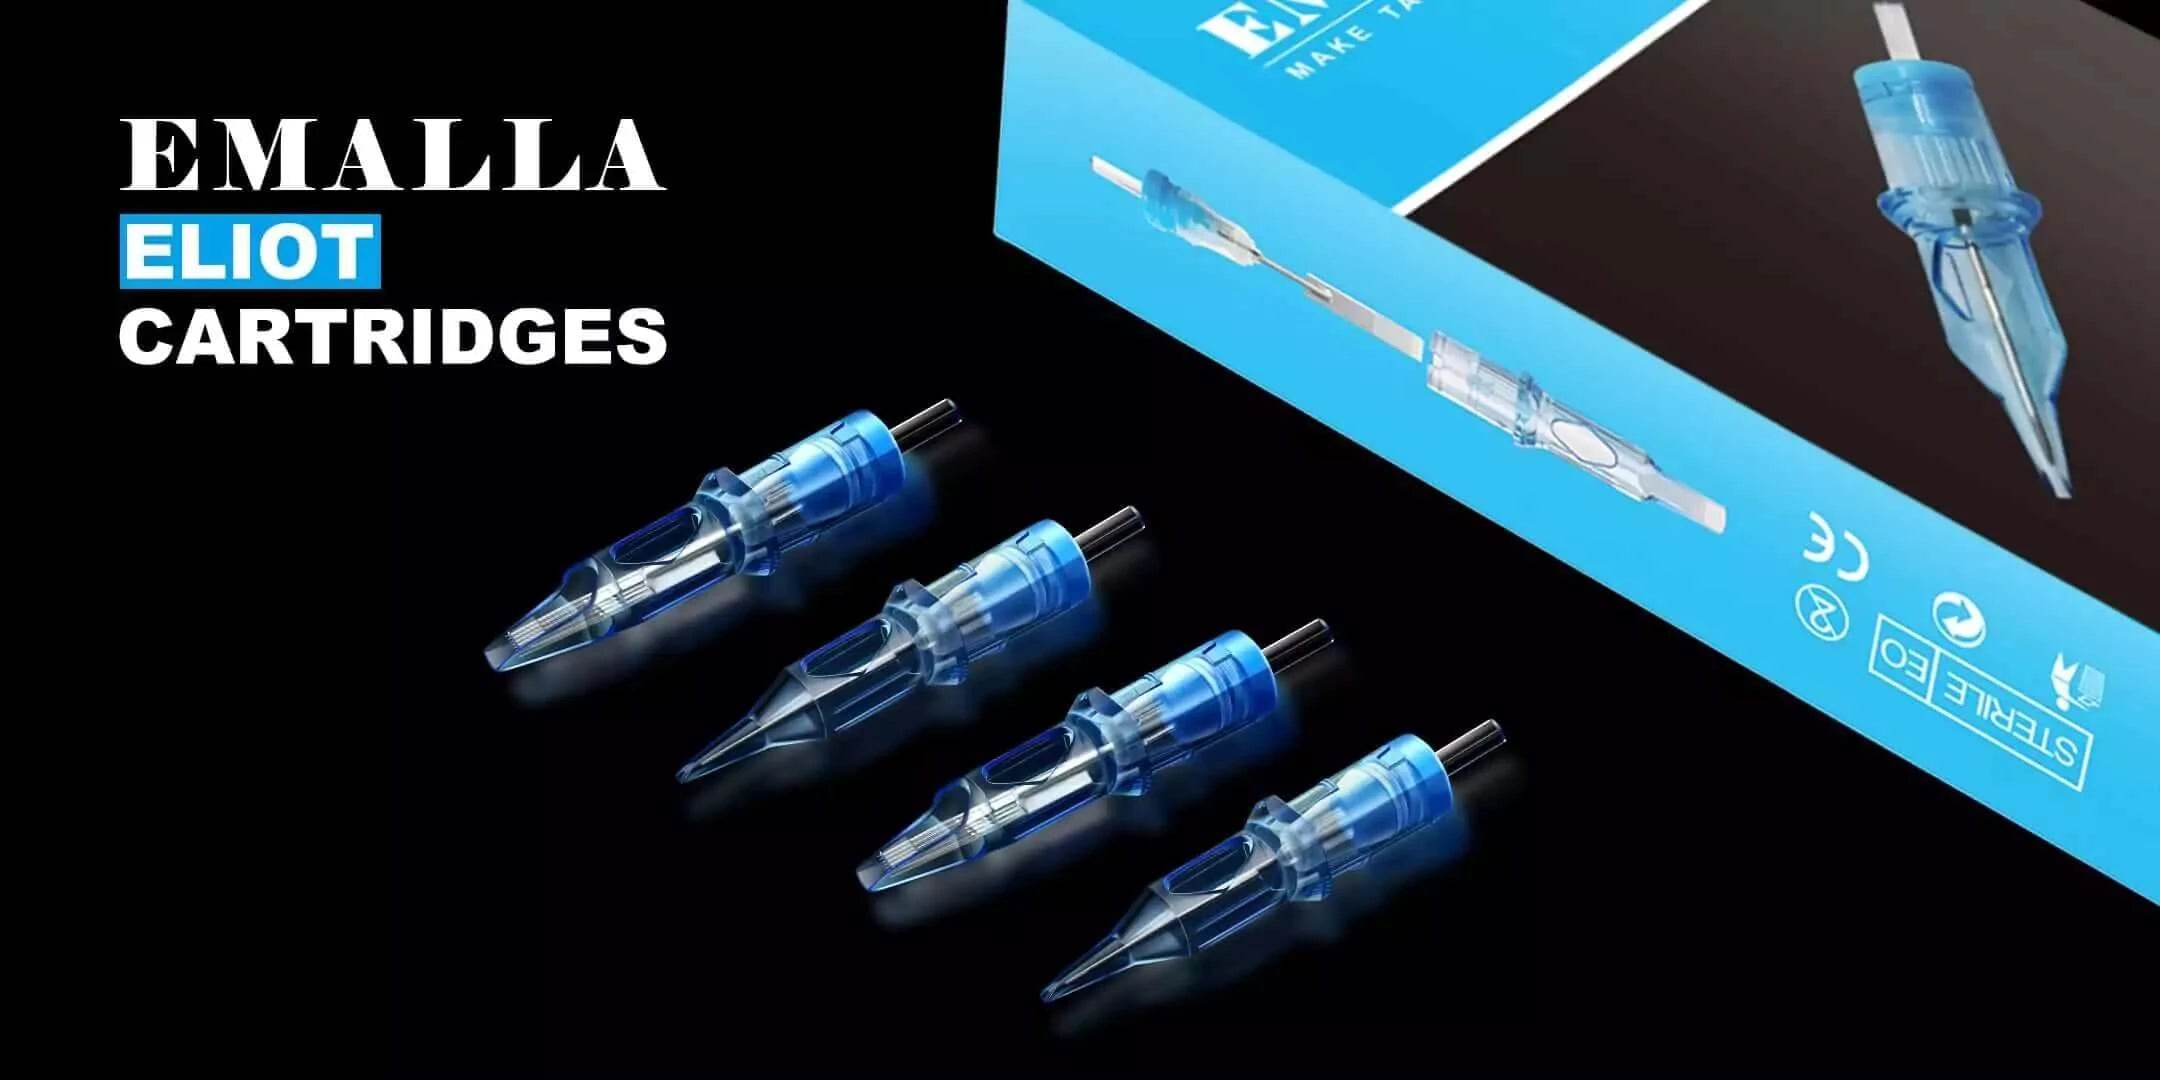 EMALLA ELIOT tattoo membrane cartridges with safe PC material and stainless steel.